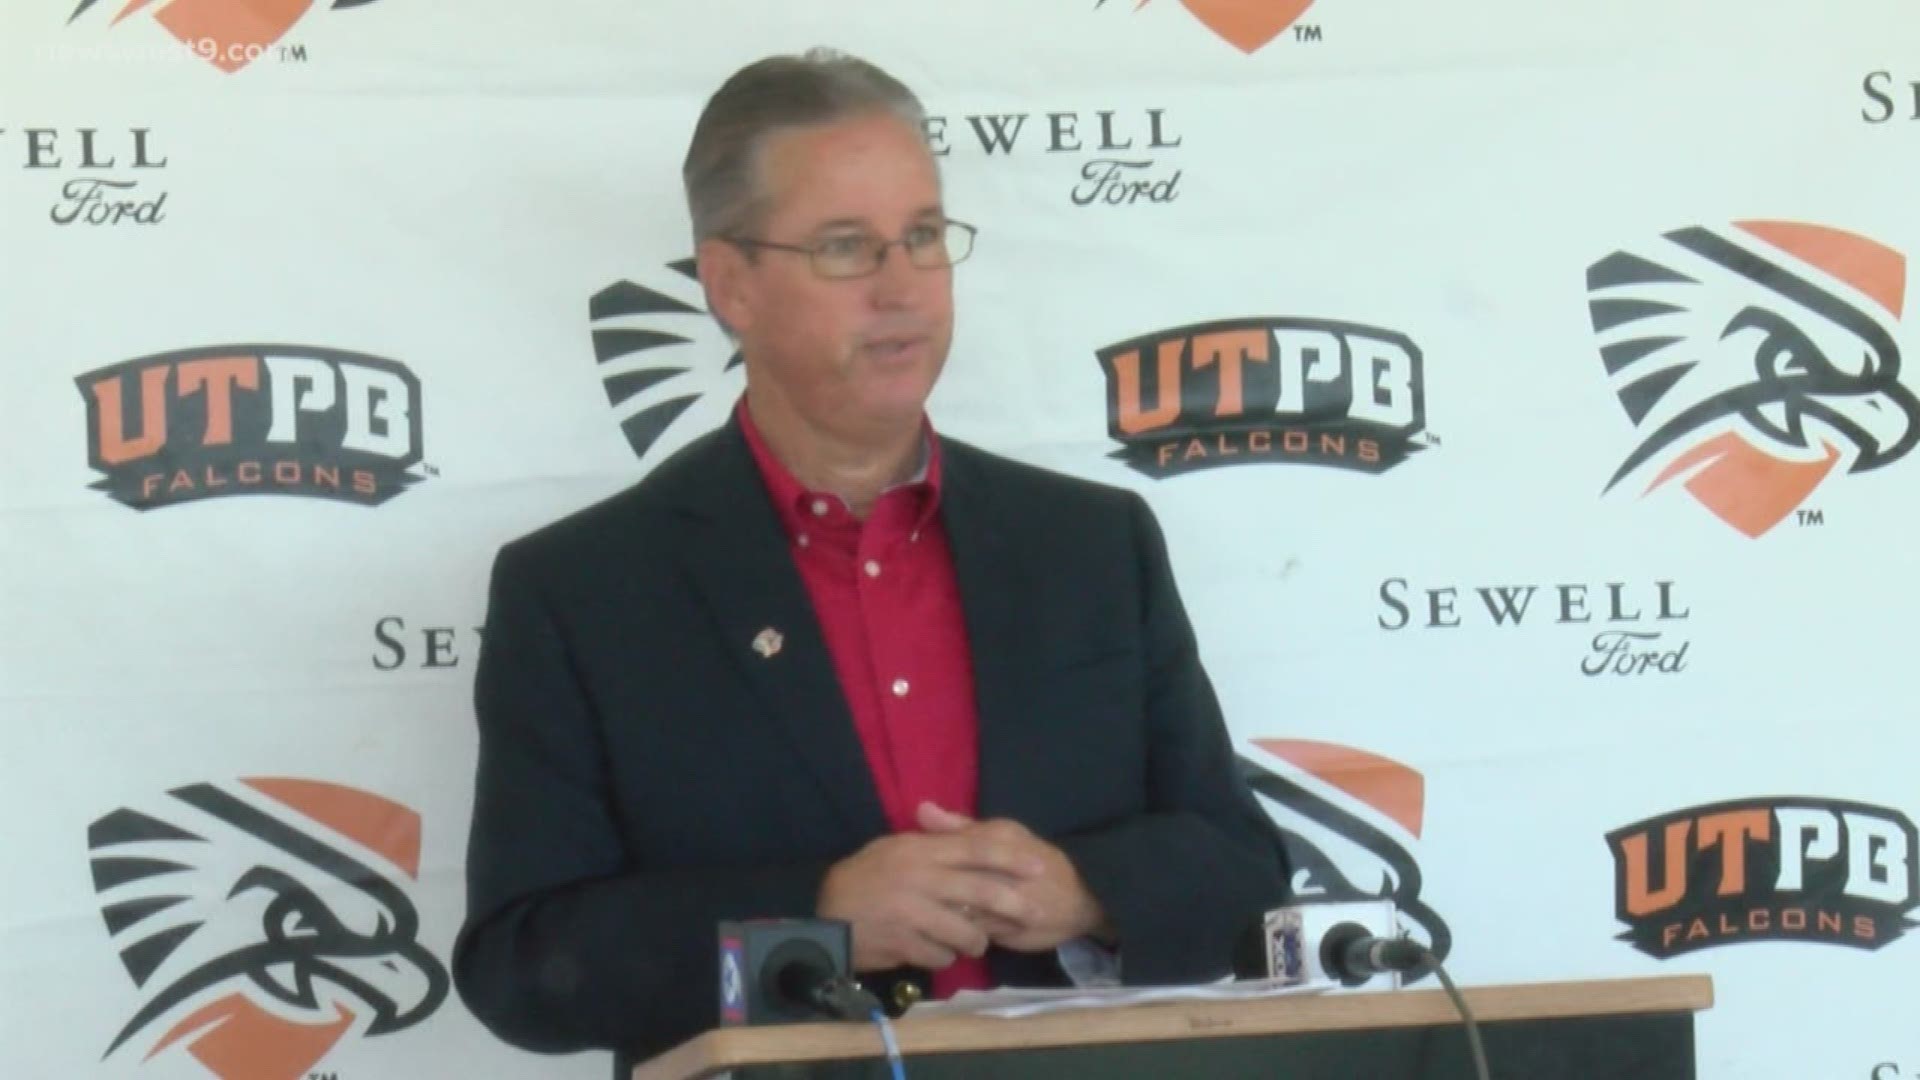 In UTPB's opening athletic presser, AD Scott Farmer emphasized the addition of the "Champions Fund".